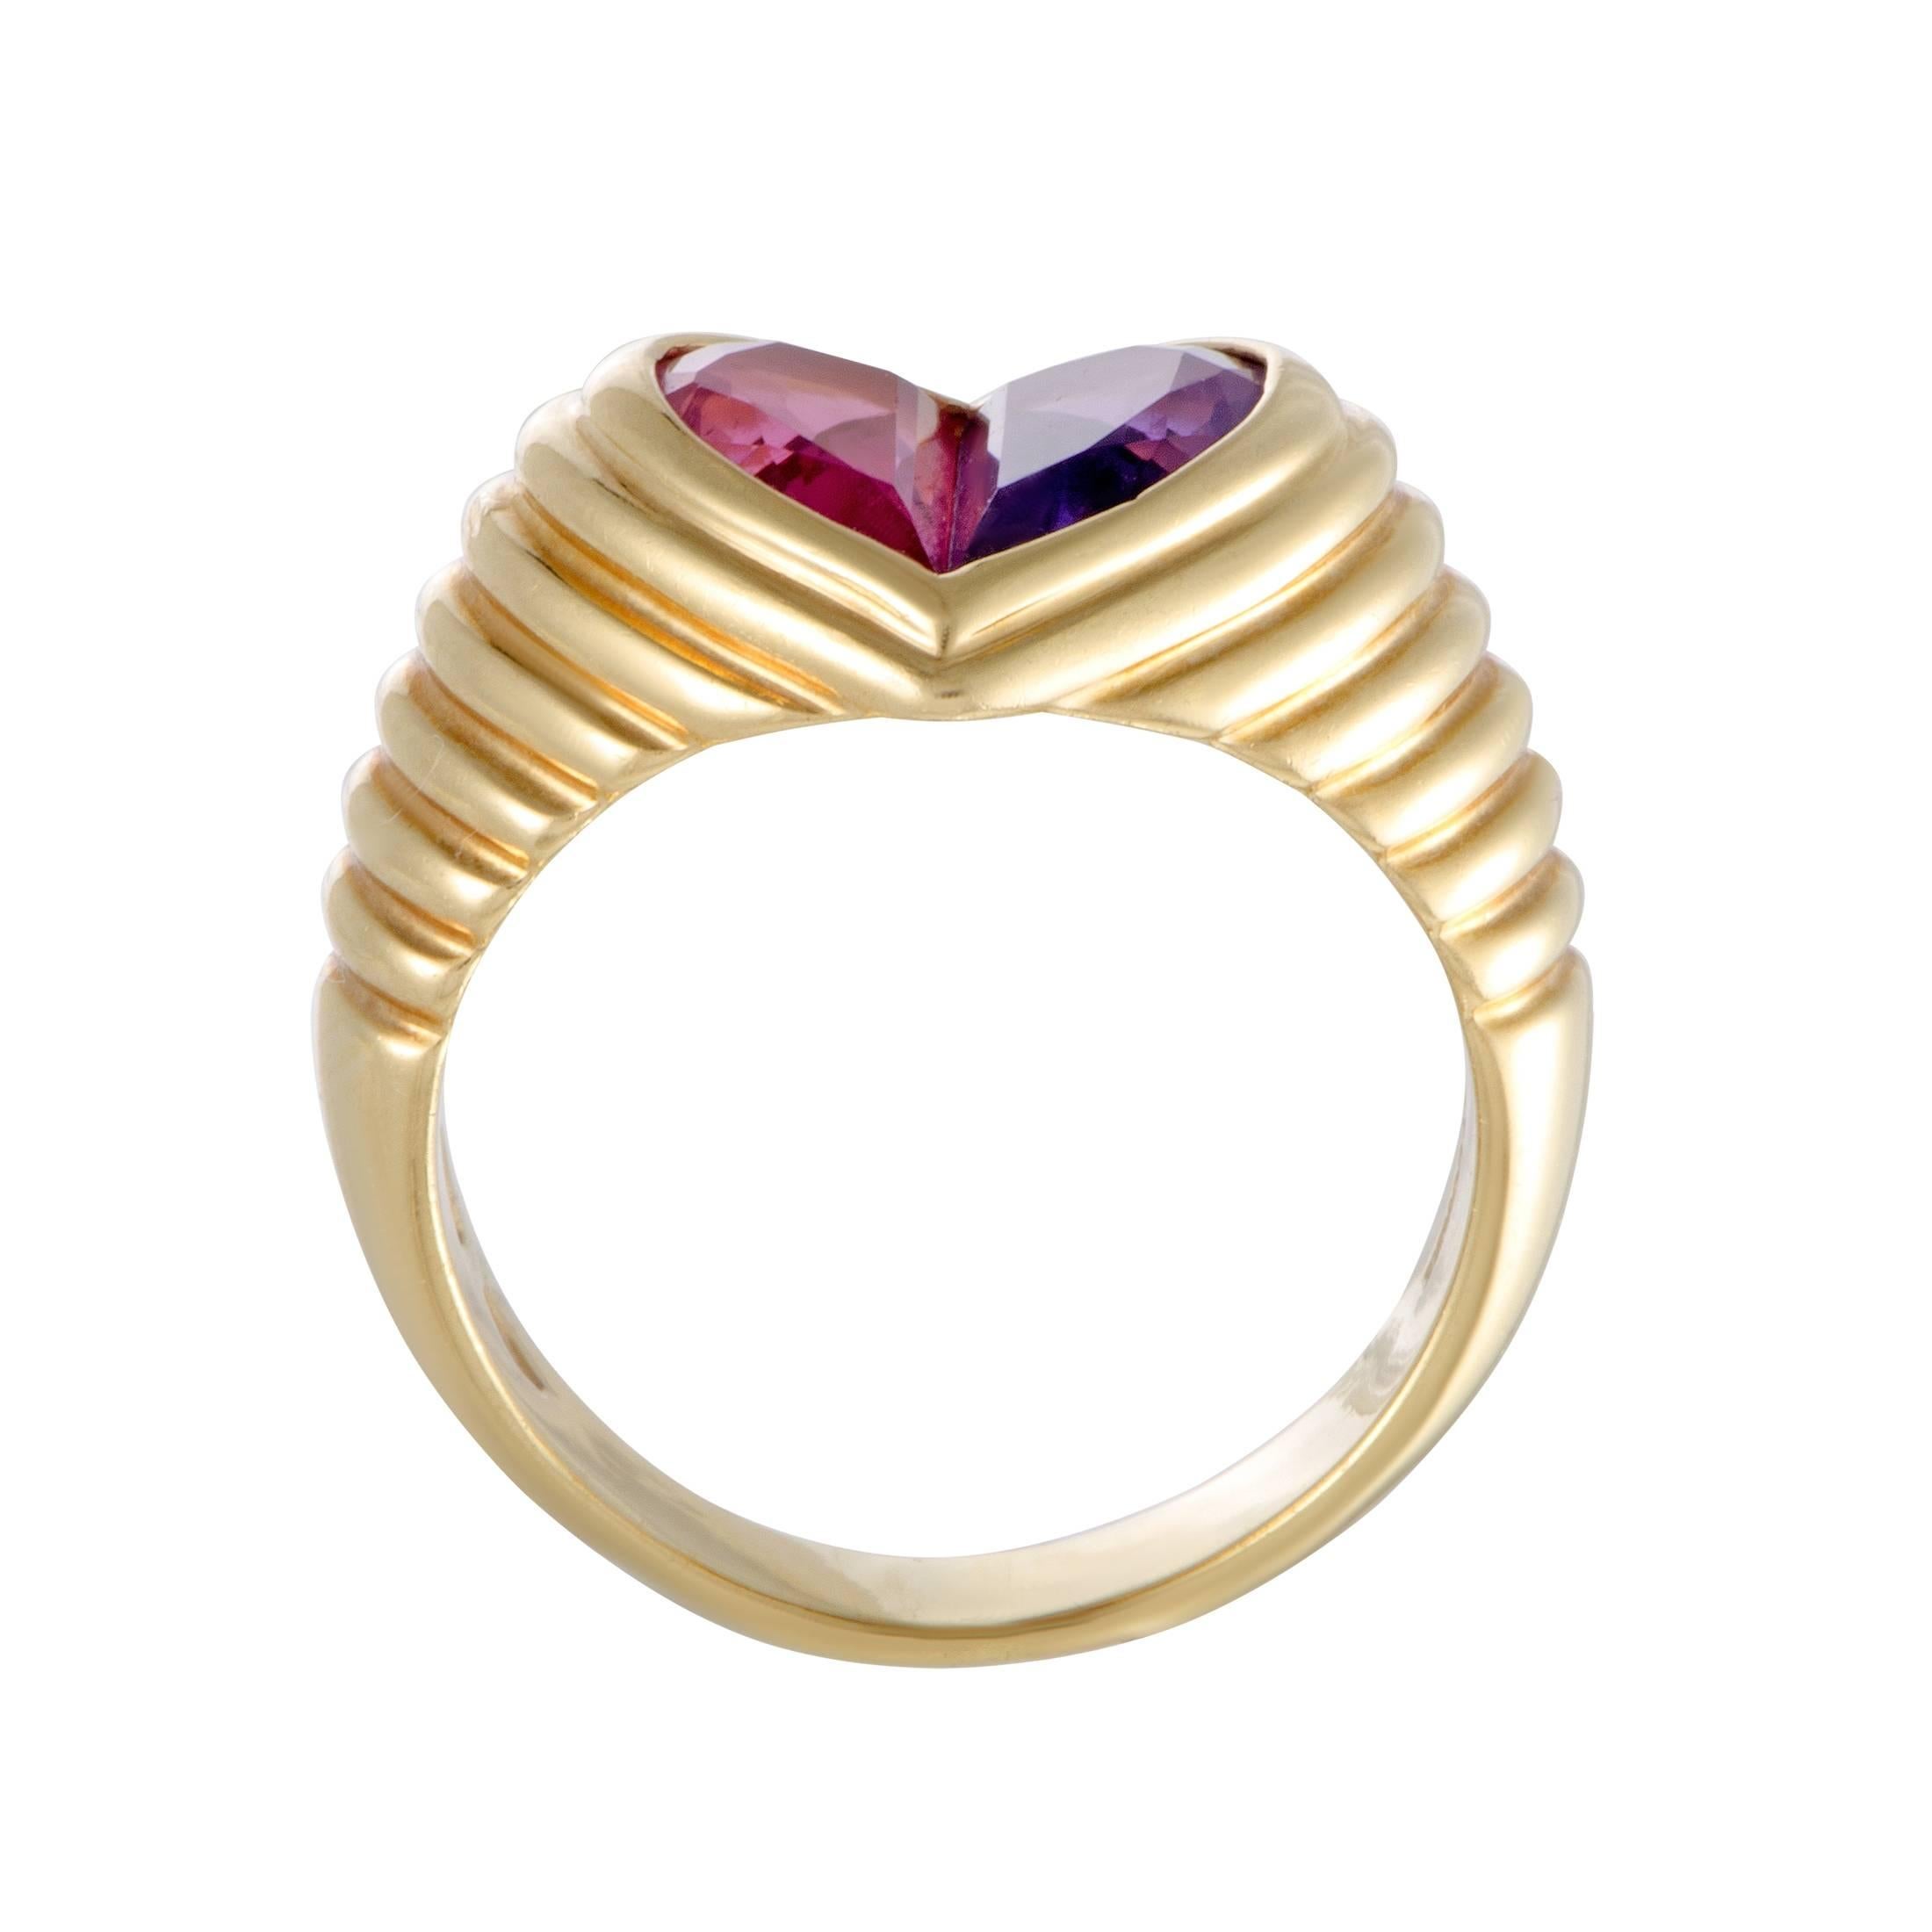 This beautiful ring by Bulgari is elegantly crafted in shimmering 18K yellow gold. The gorgeous ring's design features a heart adorned in a captivating pink tourmaline and a mesmerizing purple amethyst that add a glamorous appeal to the attractive